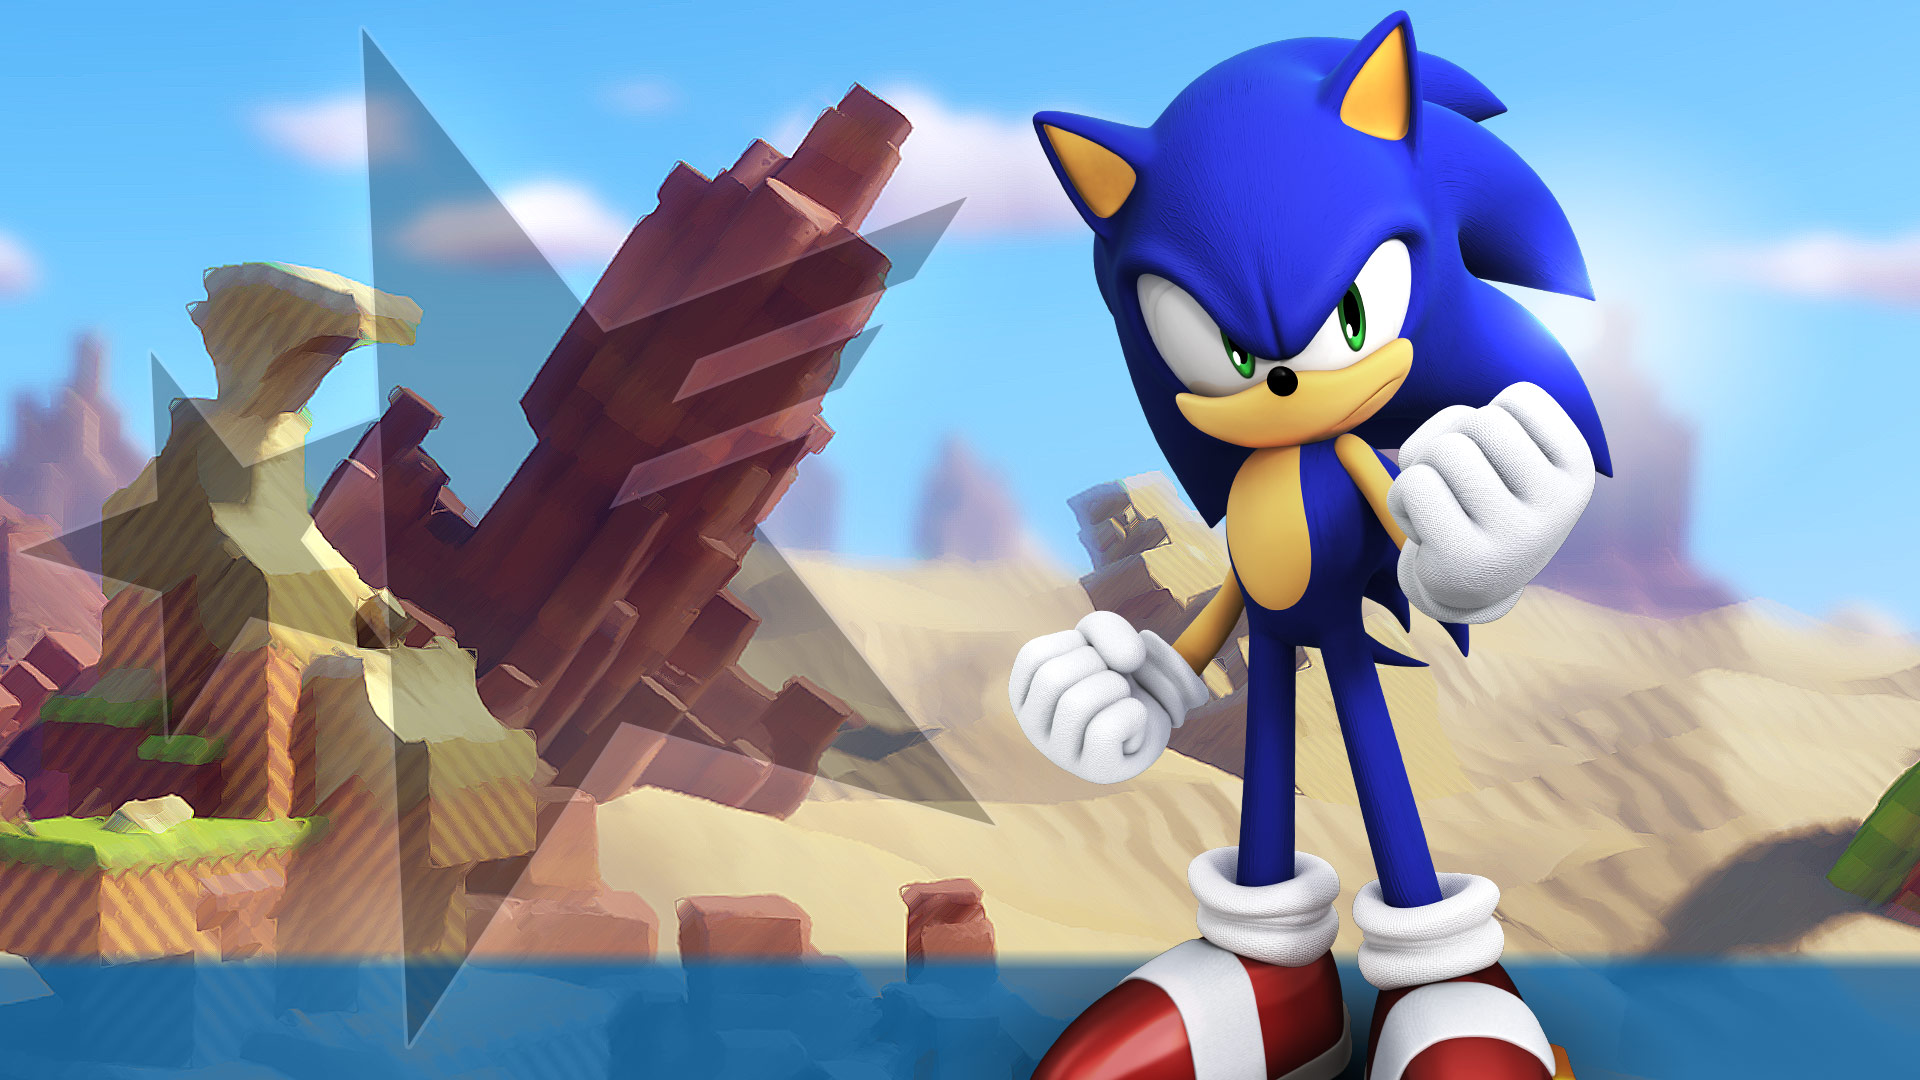 Sonic Forces on Steam